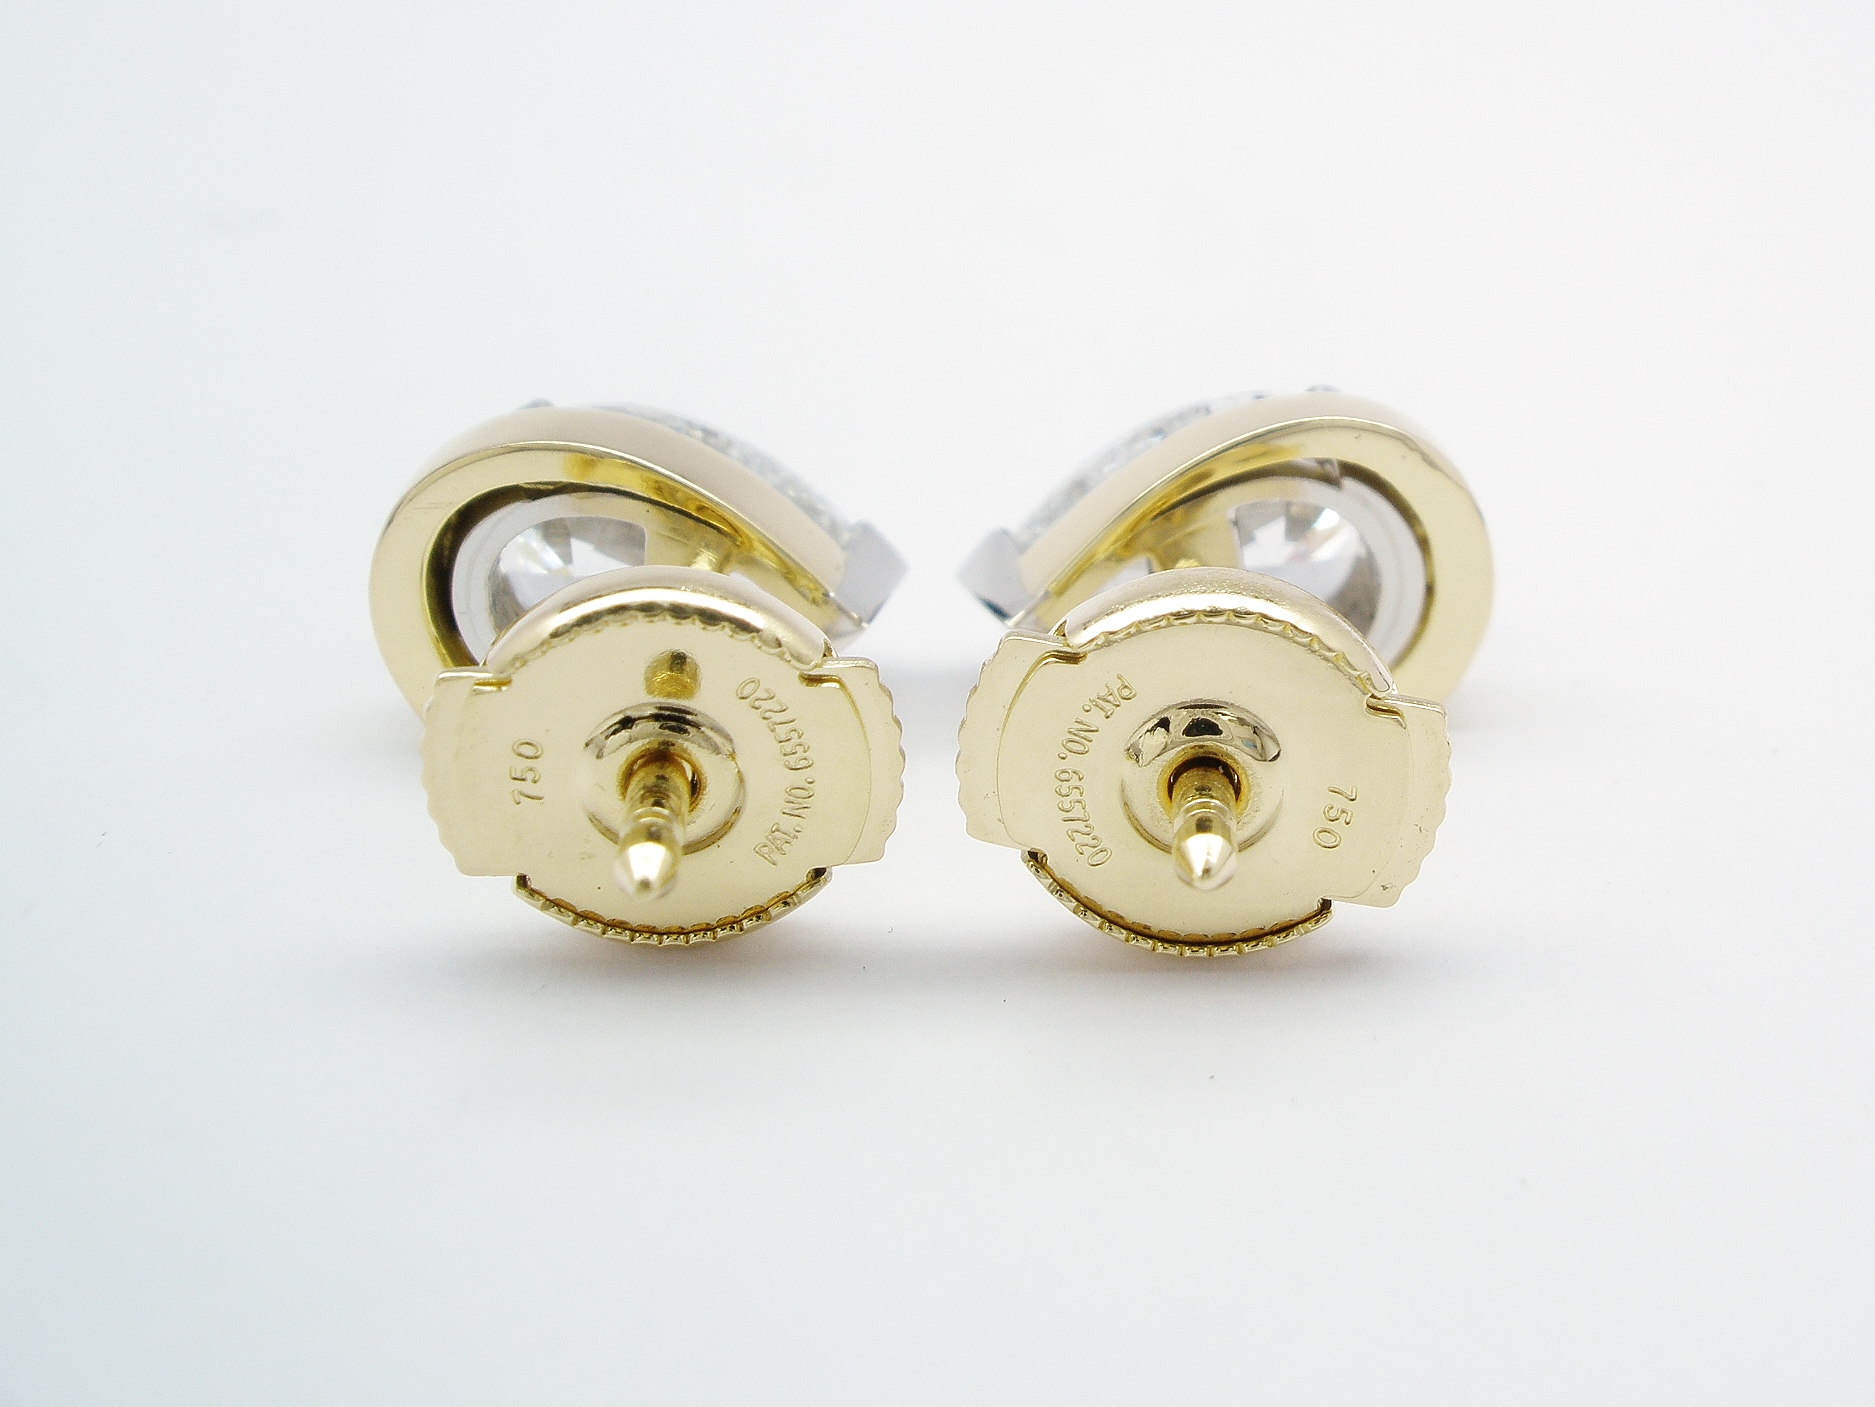 A pair of 1.00ct. pear shaped diamond ear studs mounted in platinum and 18ct. yellow gold with 'Guardian' safety spring fittings